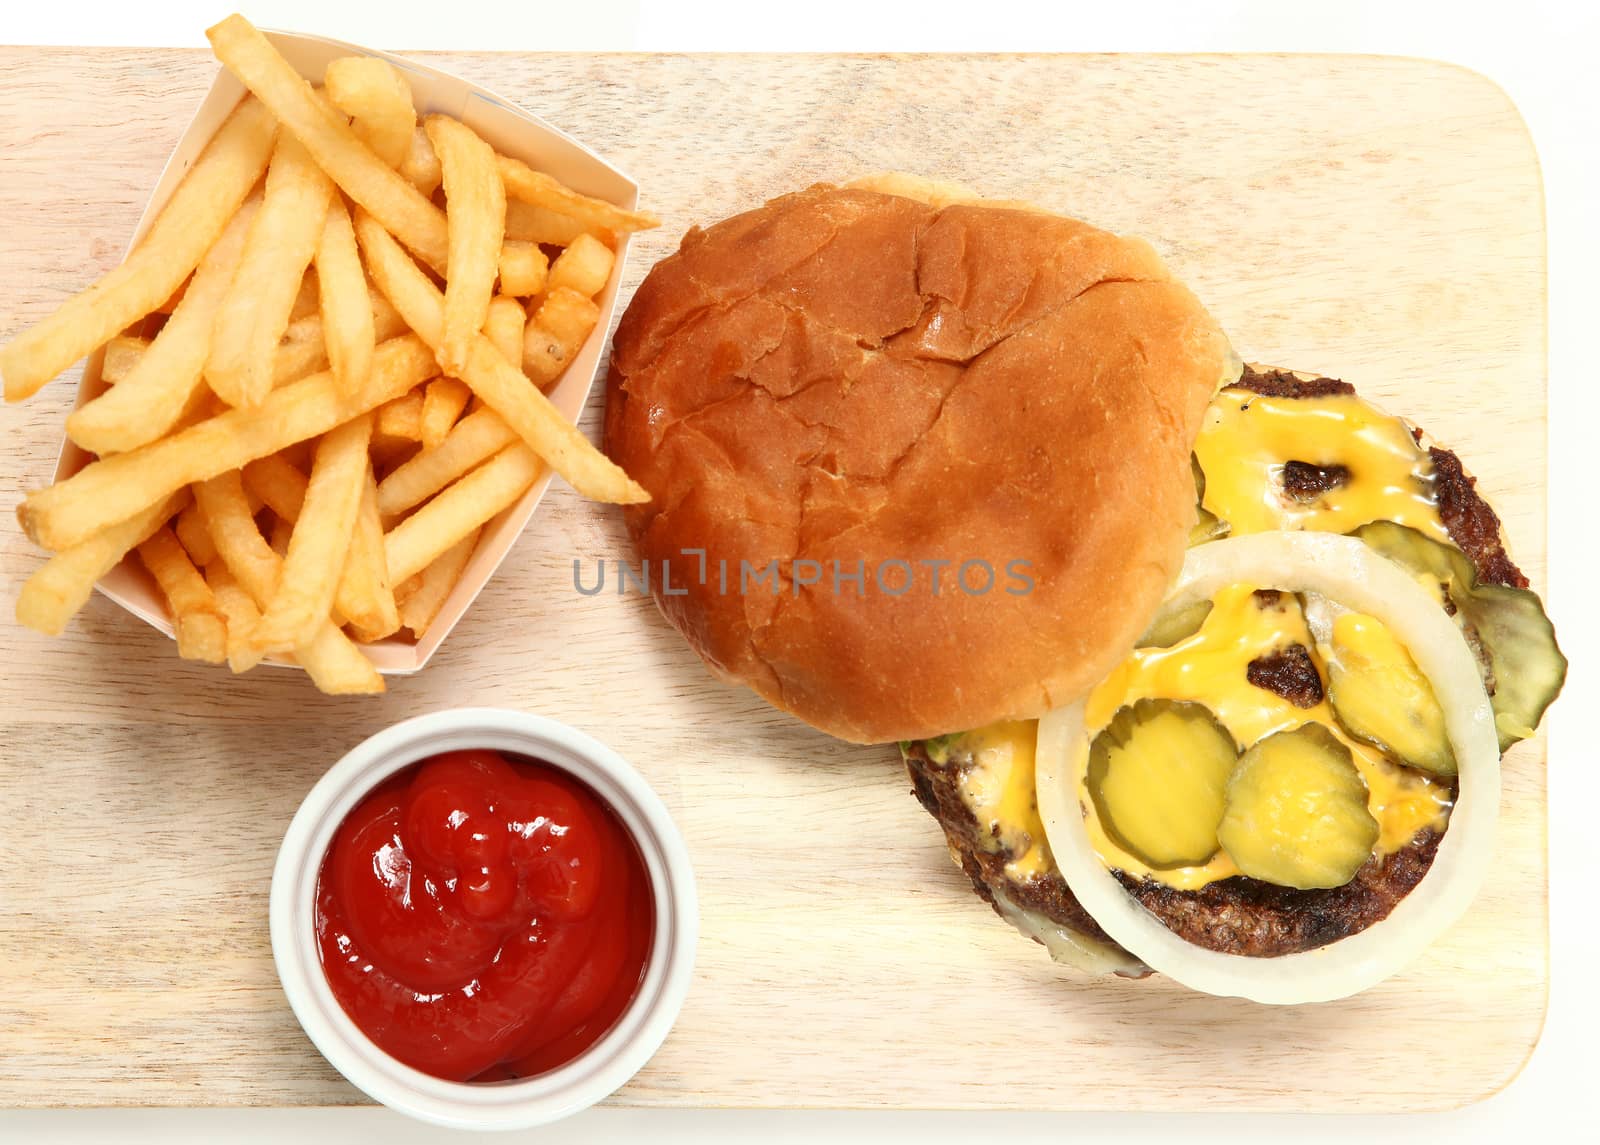 Top View Burger and Fries Served on Cutting Board with Ketchup.